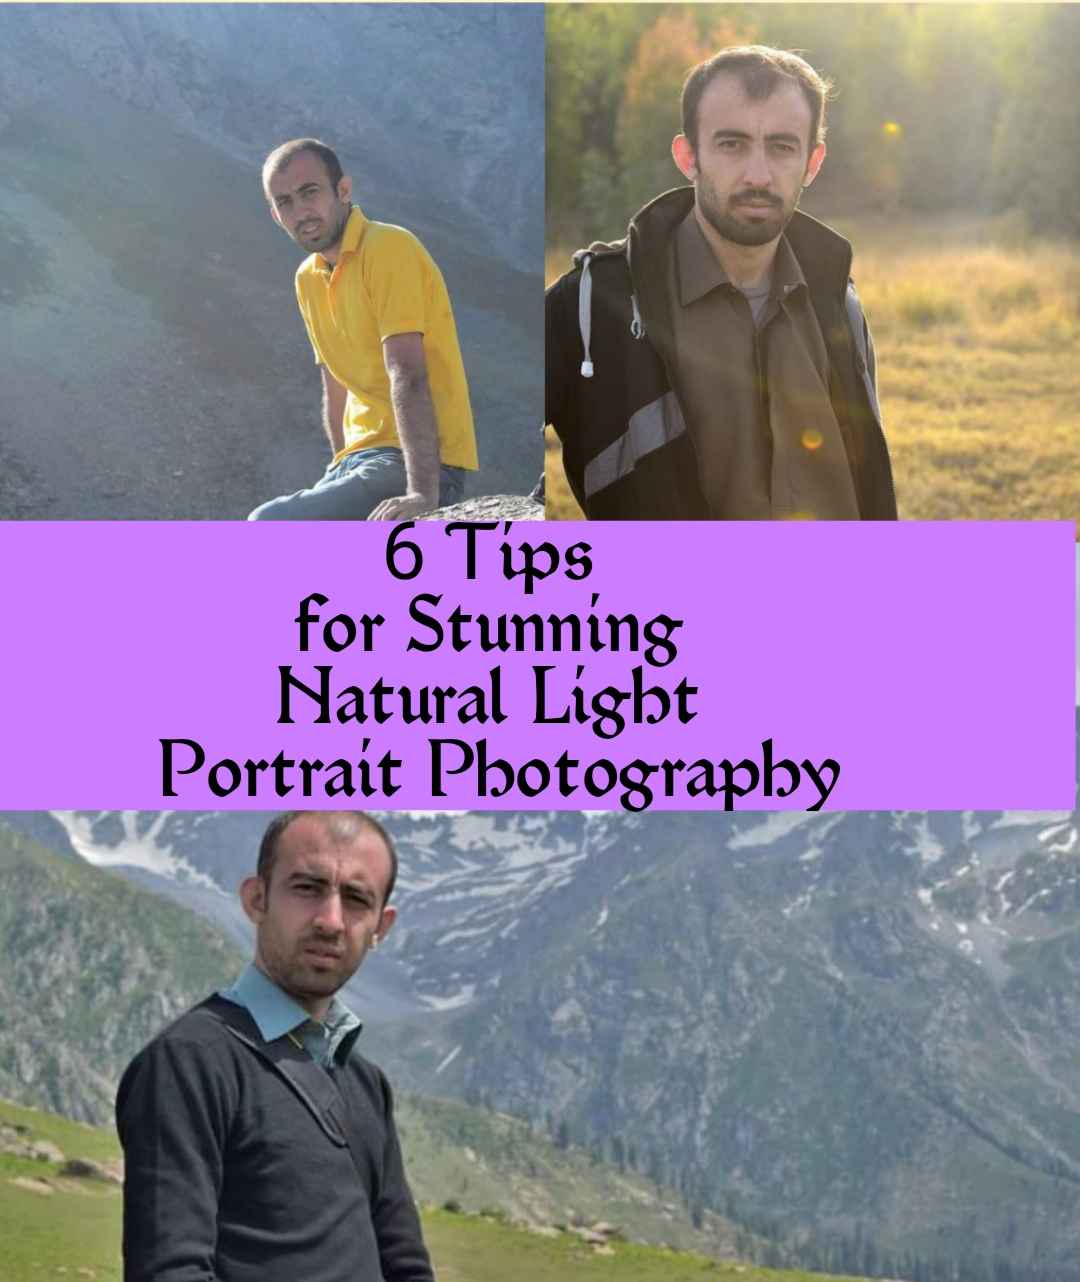 6 Tips for Stunning Natural Light Portrait Photography